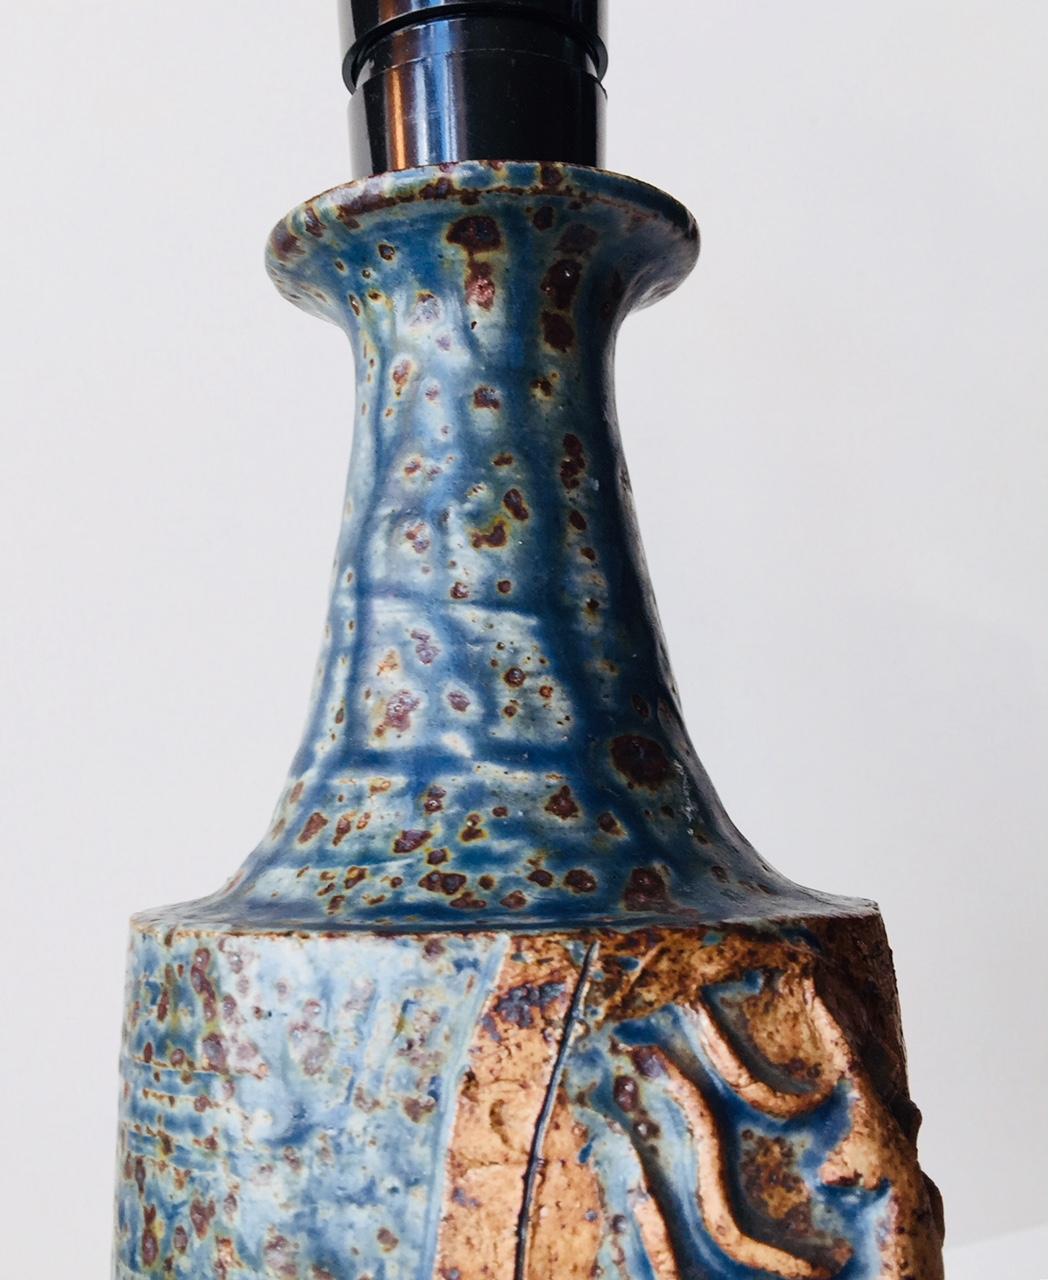 Glazed Scandinavian Architectural Pottery Table Lamp with Blue Glaze, 1970s For Sale